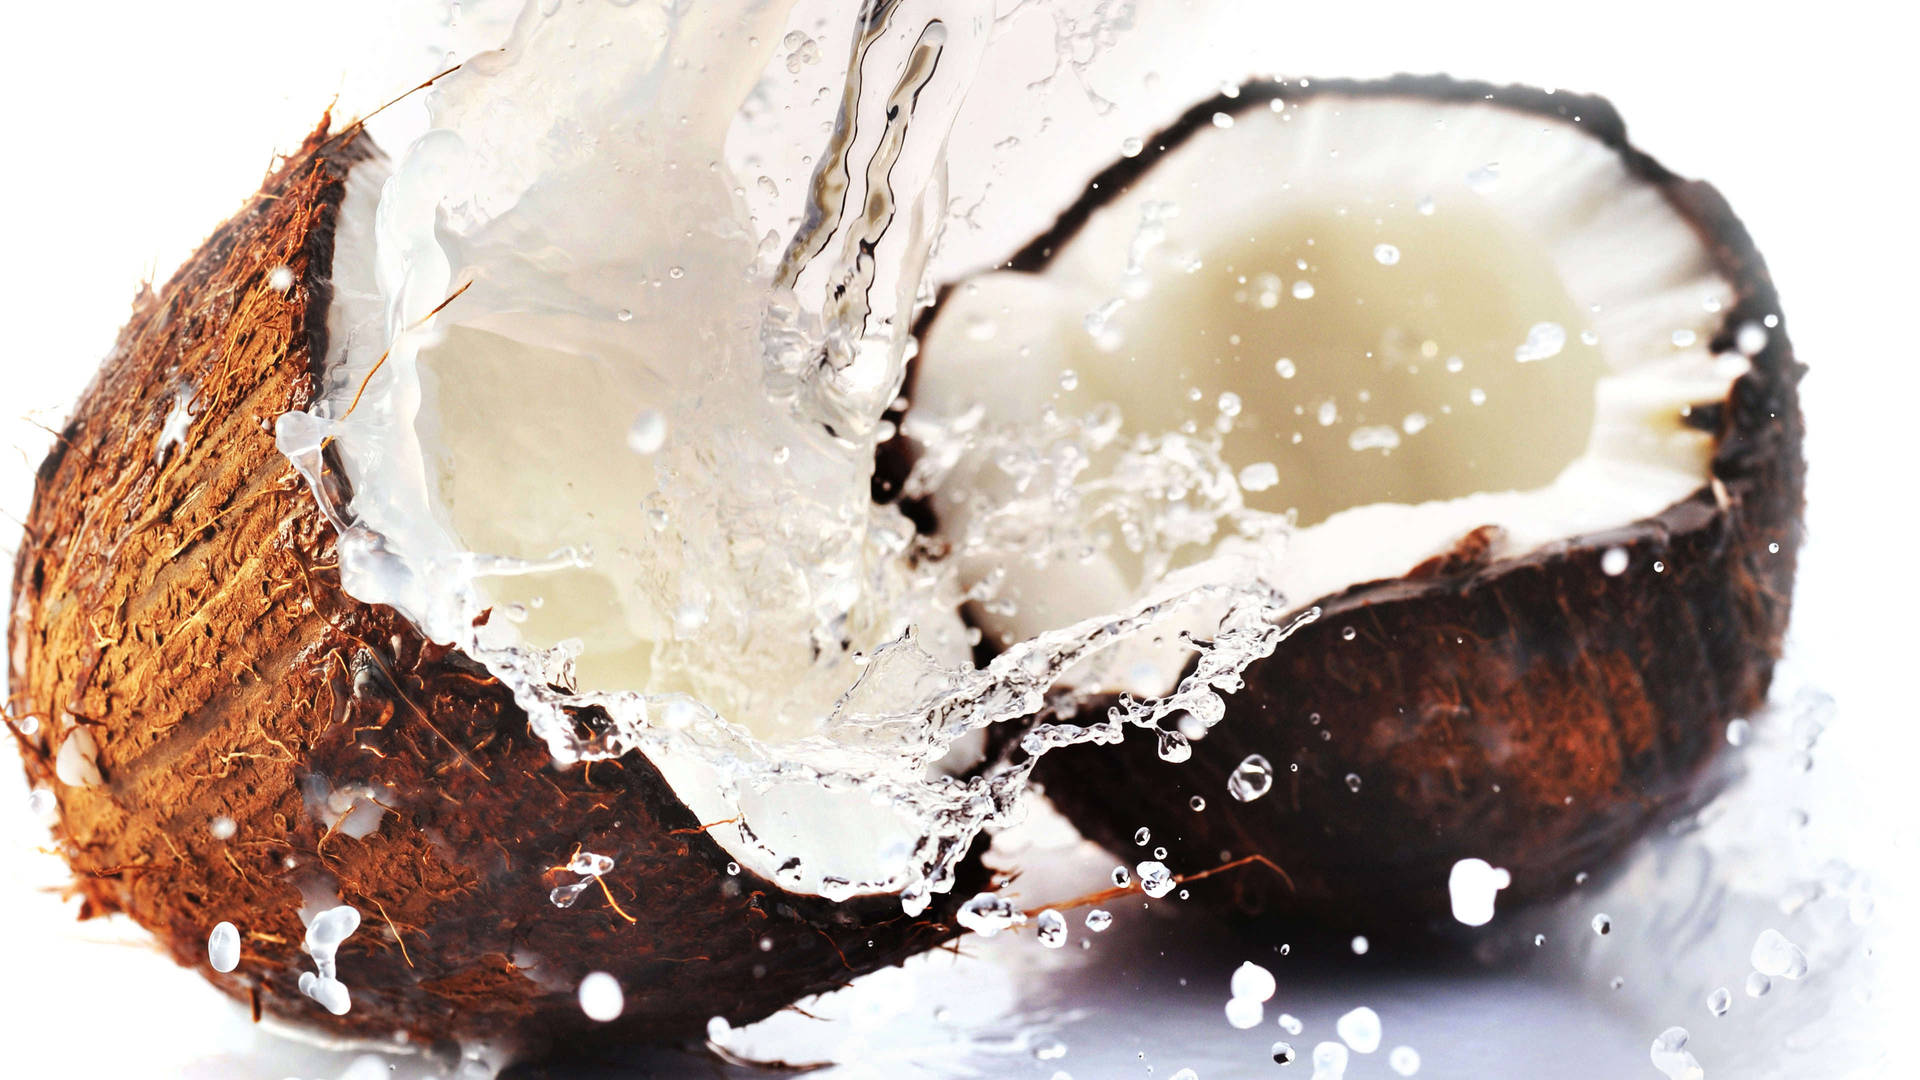 A coconut is being cut open and water splashes out - Coconut